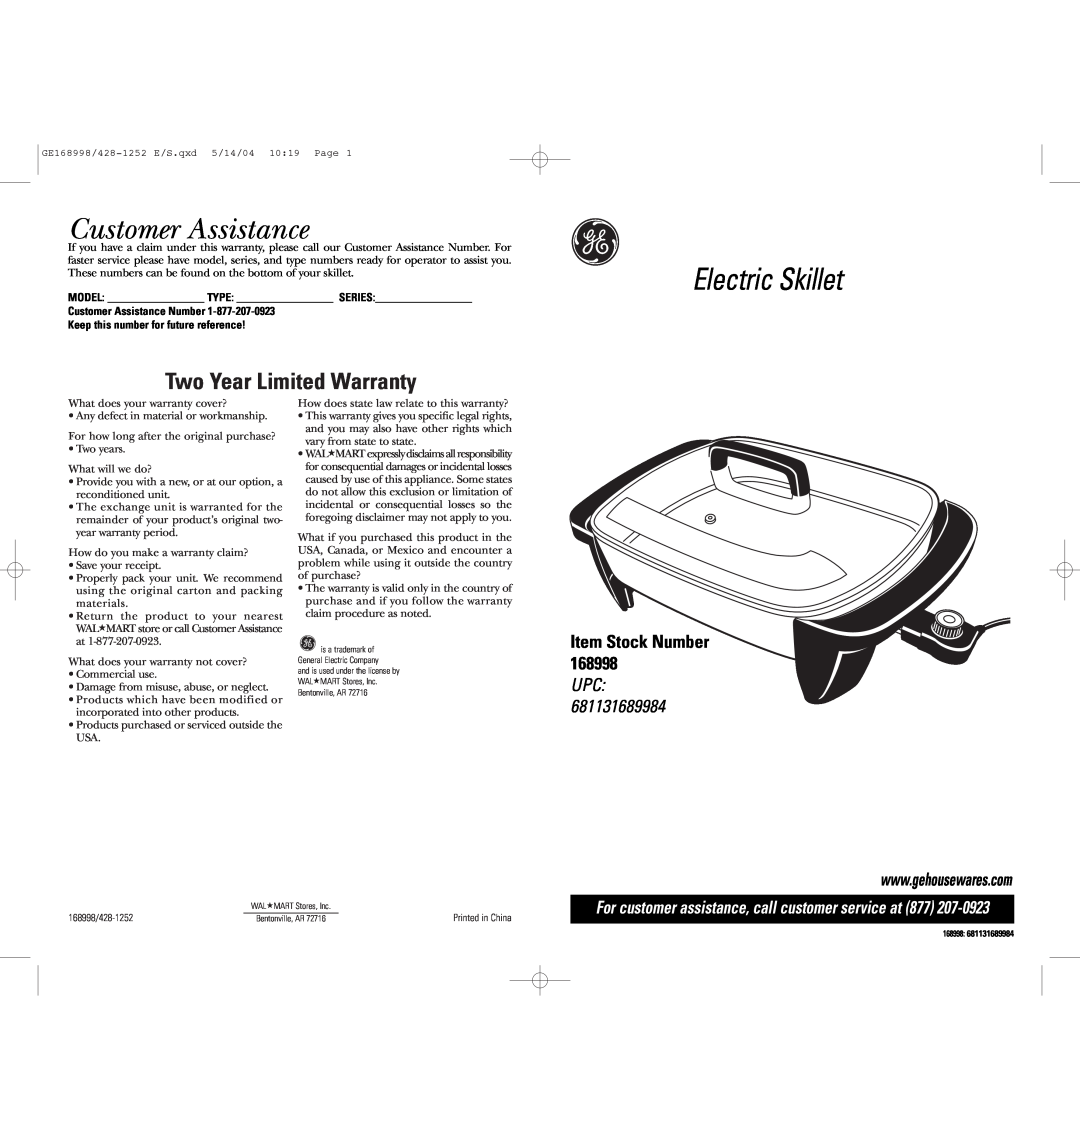 GE 681131689984 warranty Customer Assistance, Electric Skillet, Two Year Limited Warranty, Item Stock Number, Upc 